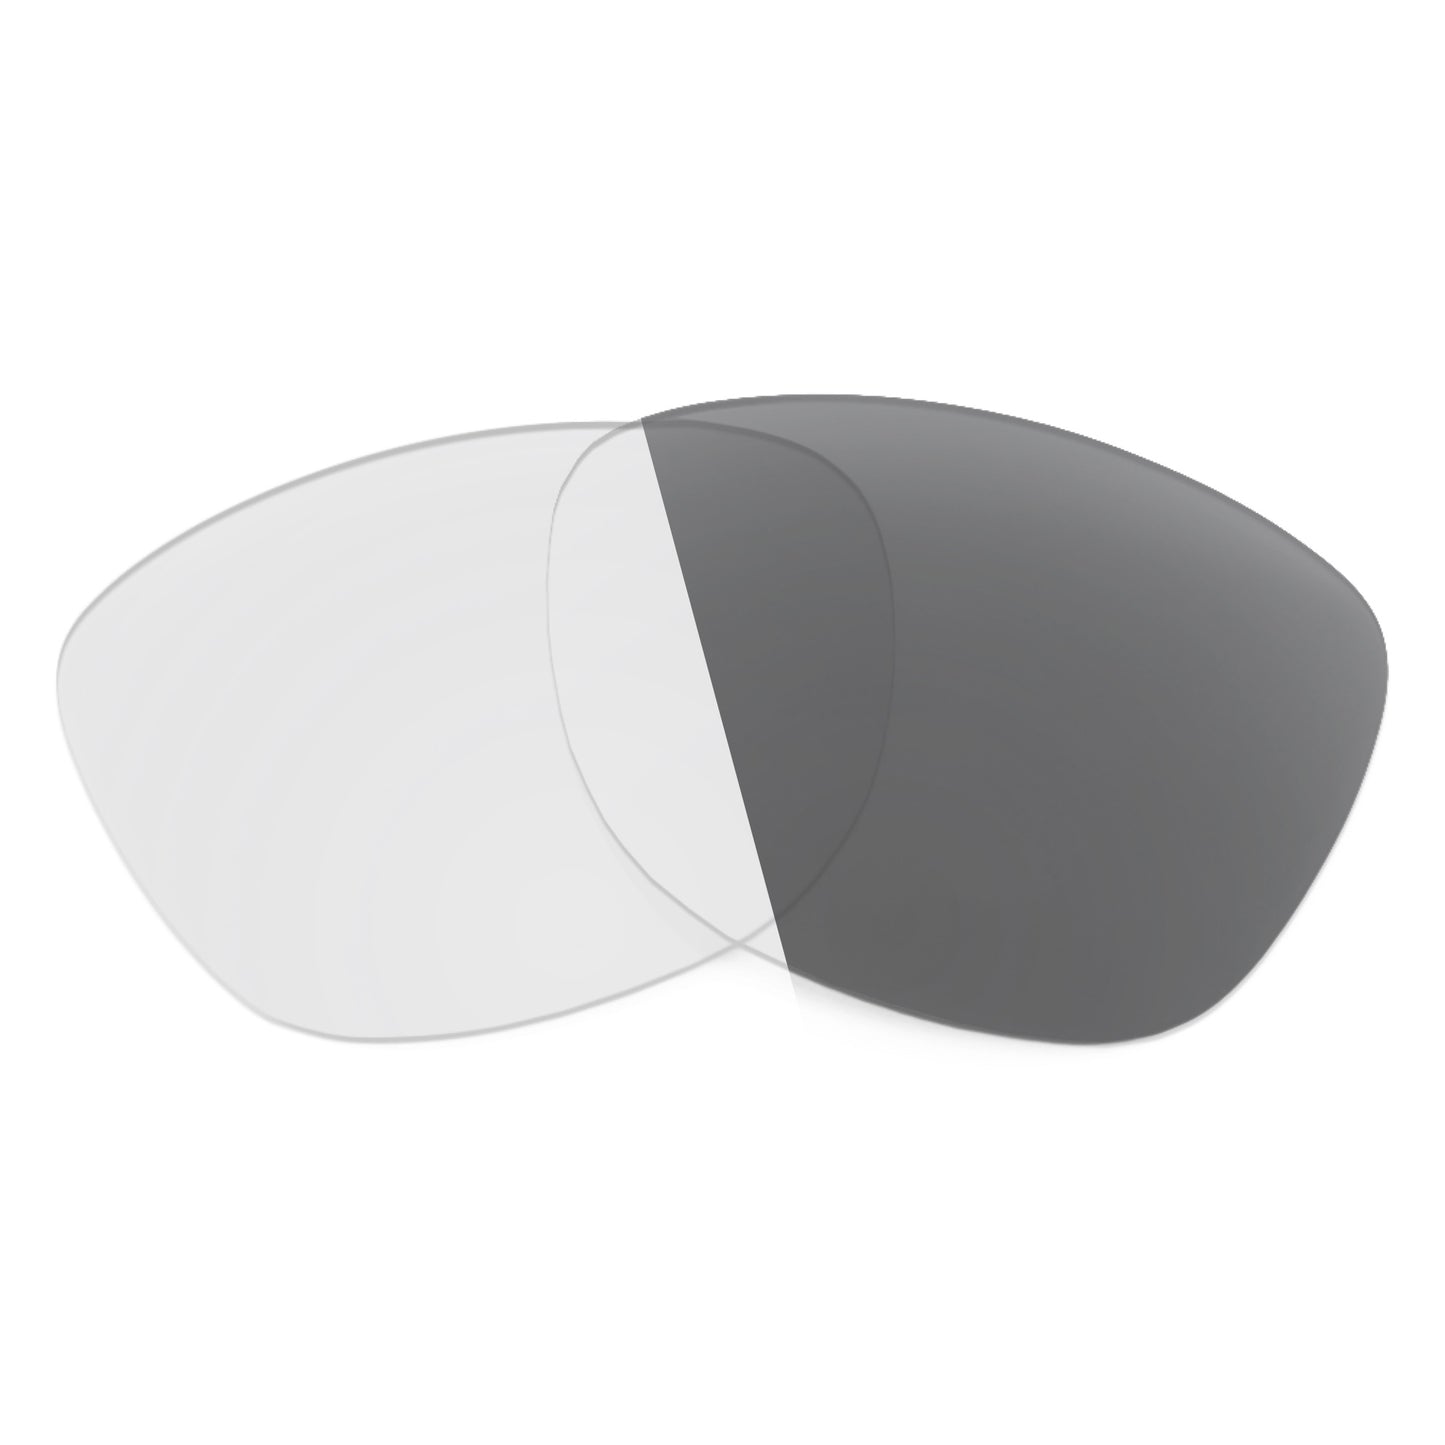 Revant replacement lenses for Ray-Ban RB4178 52mm Non-Polarized Adapt Gray Photochromic